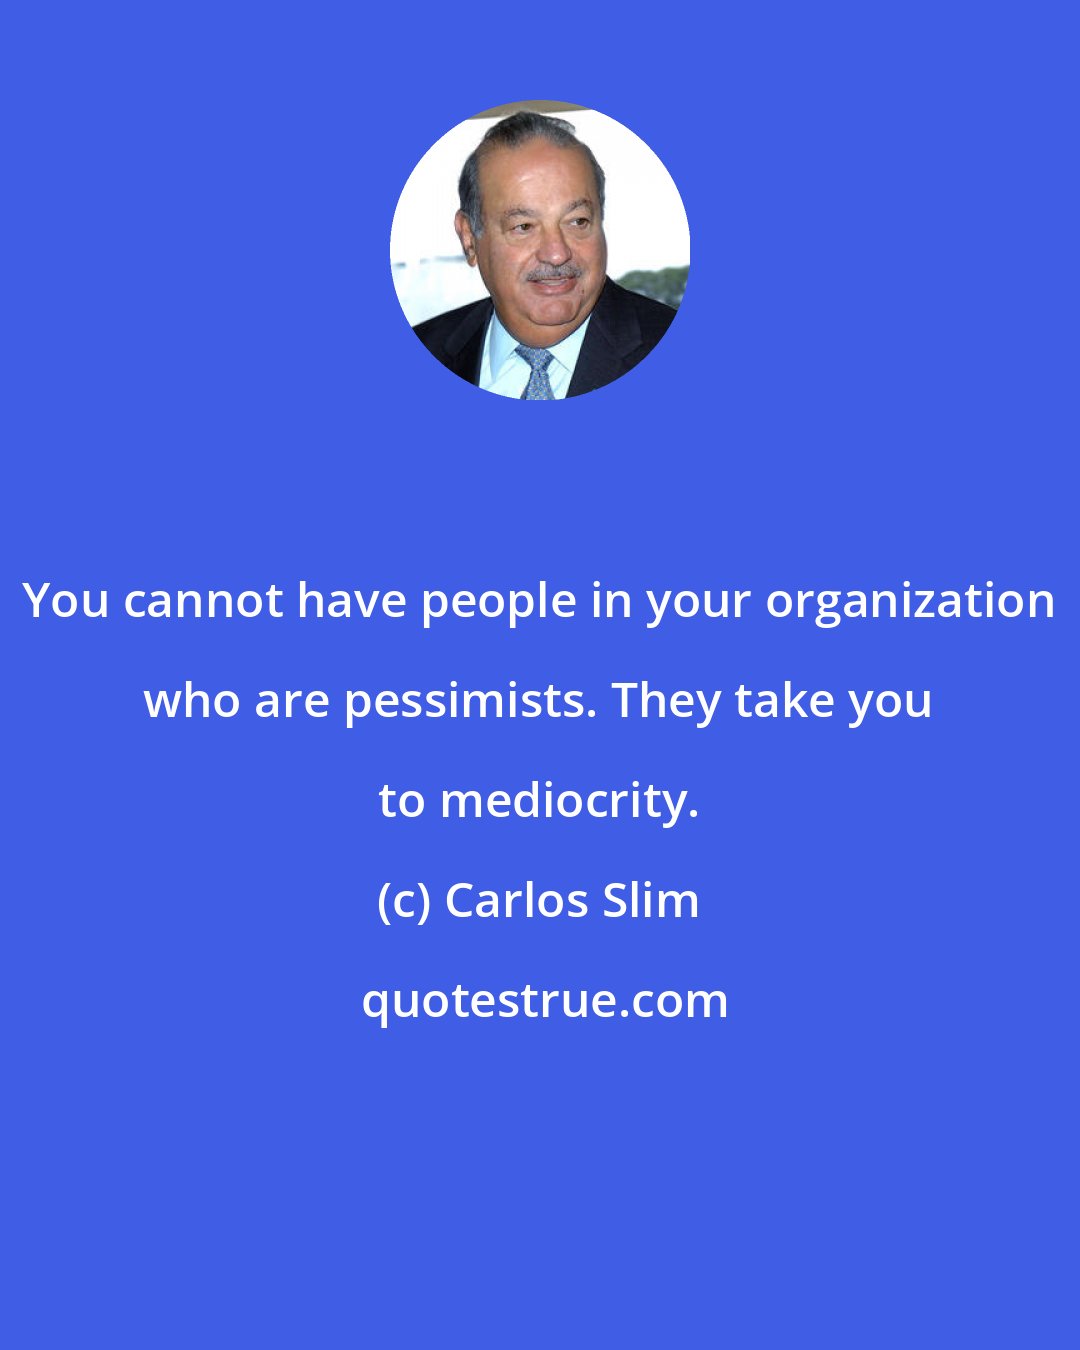 Carlos Slim: You cannot have people in your organization who are pessimists. They take you to mediocrity.